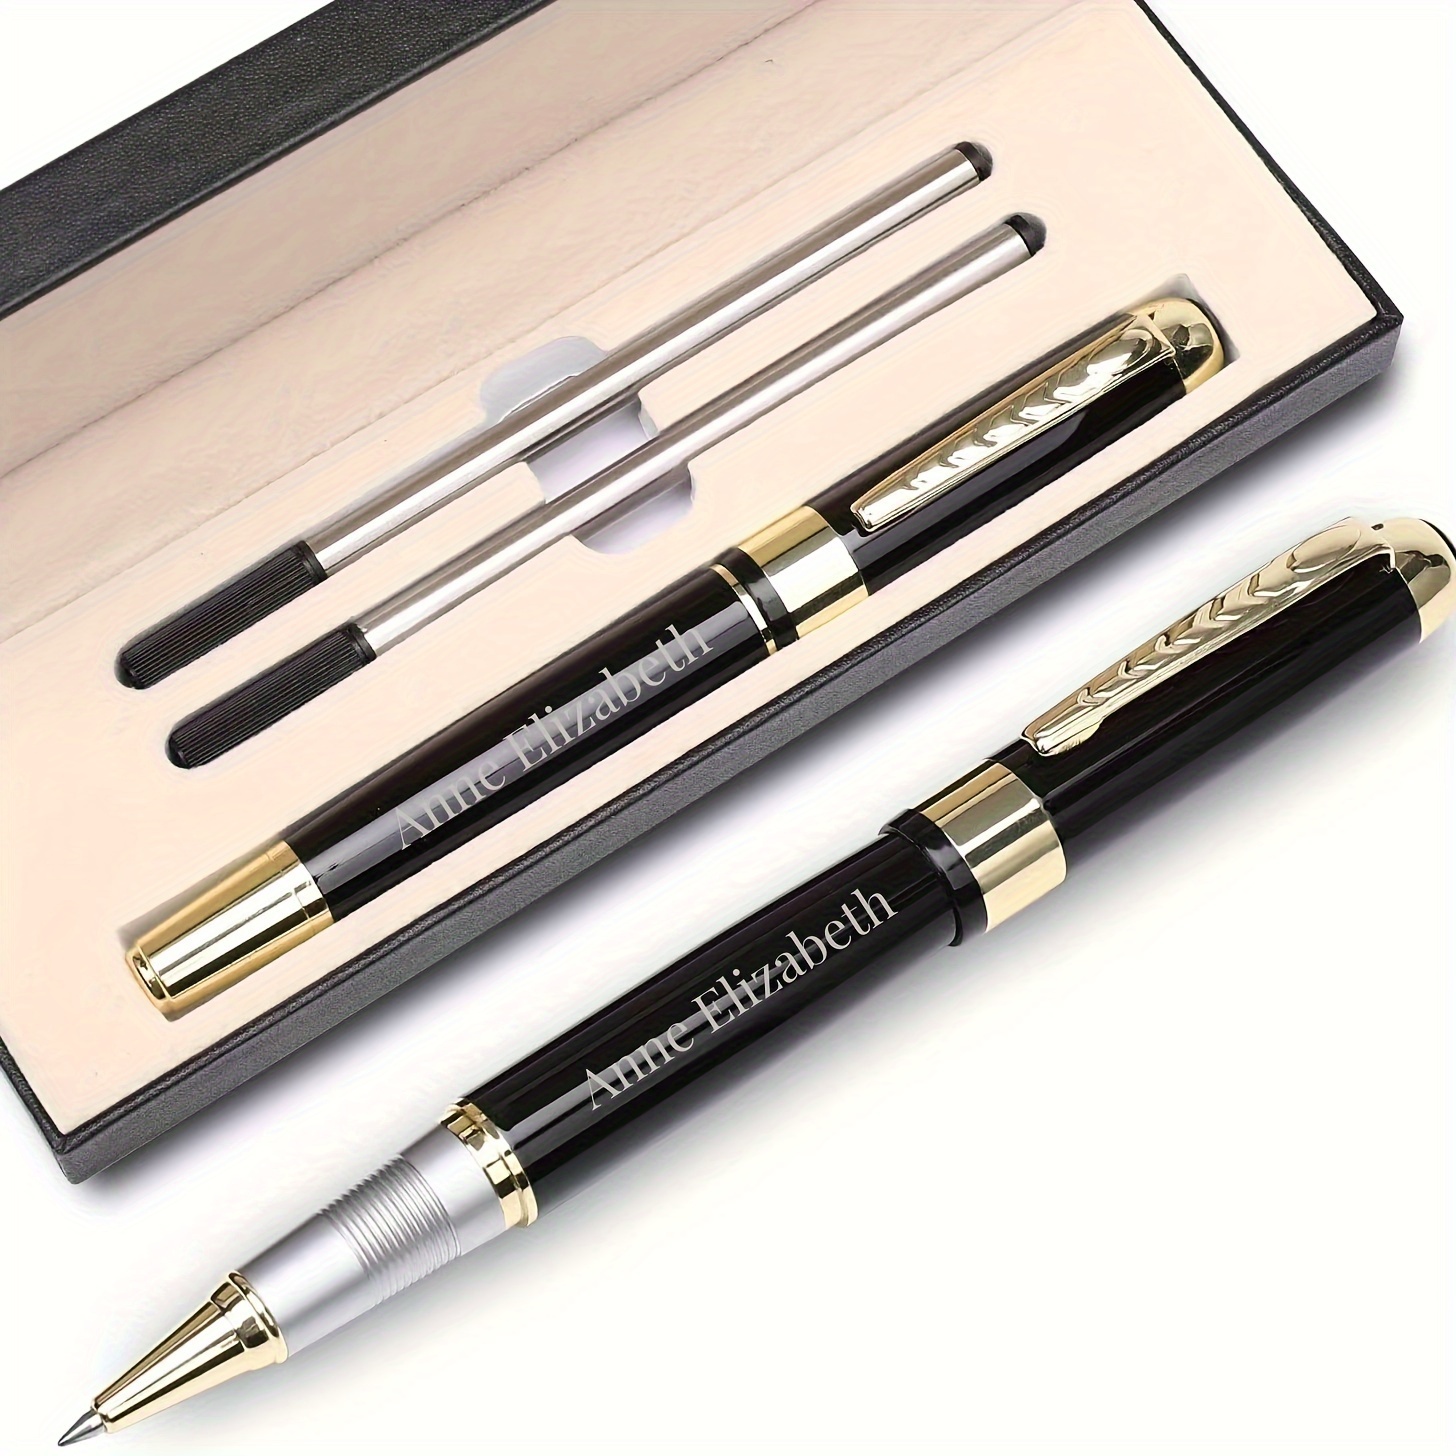 

Personalized High-grade Metal Pen Set: A Perfect Gift For Men, Husbands, Or Dads - Business Office Gift - 0.5mm Black Pen With Refill